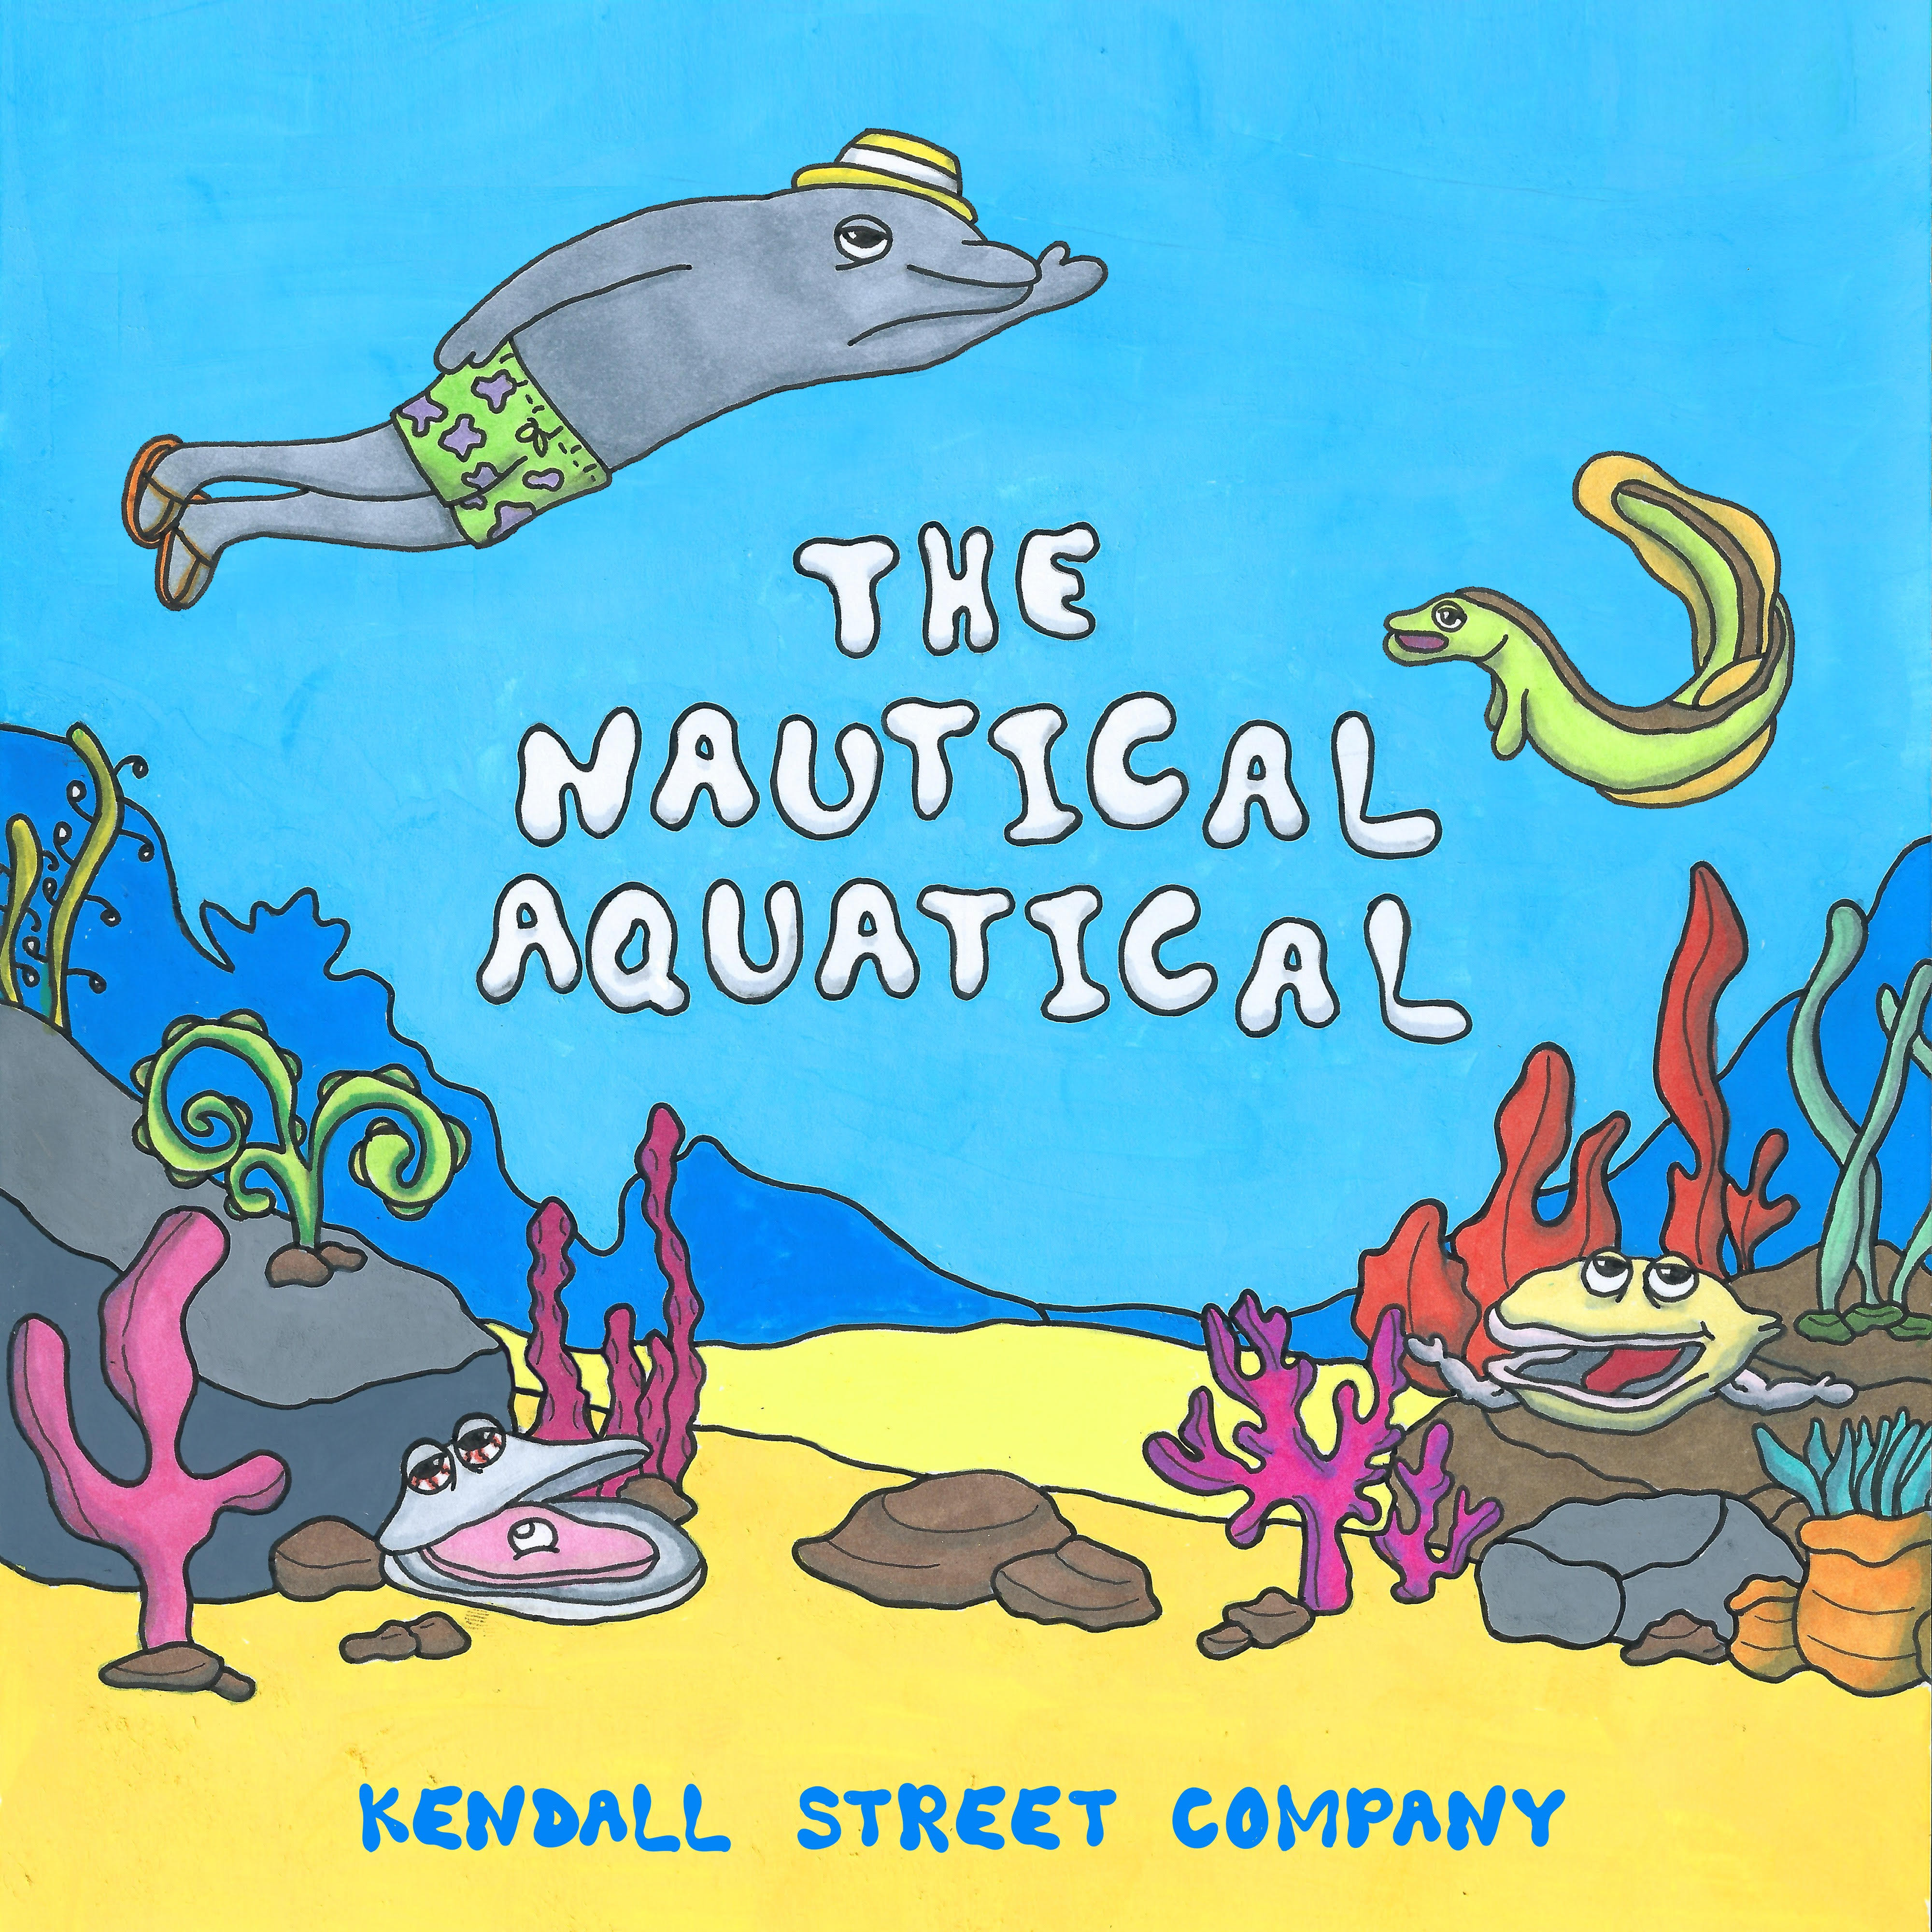 Kendall Street Company Release New Music Video "Shanti the Dolphin"